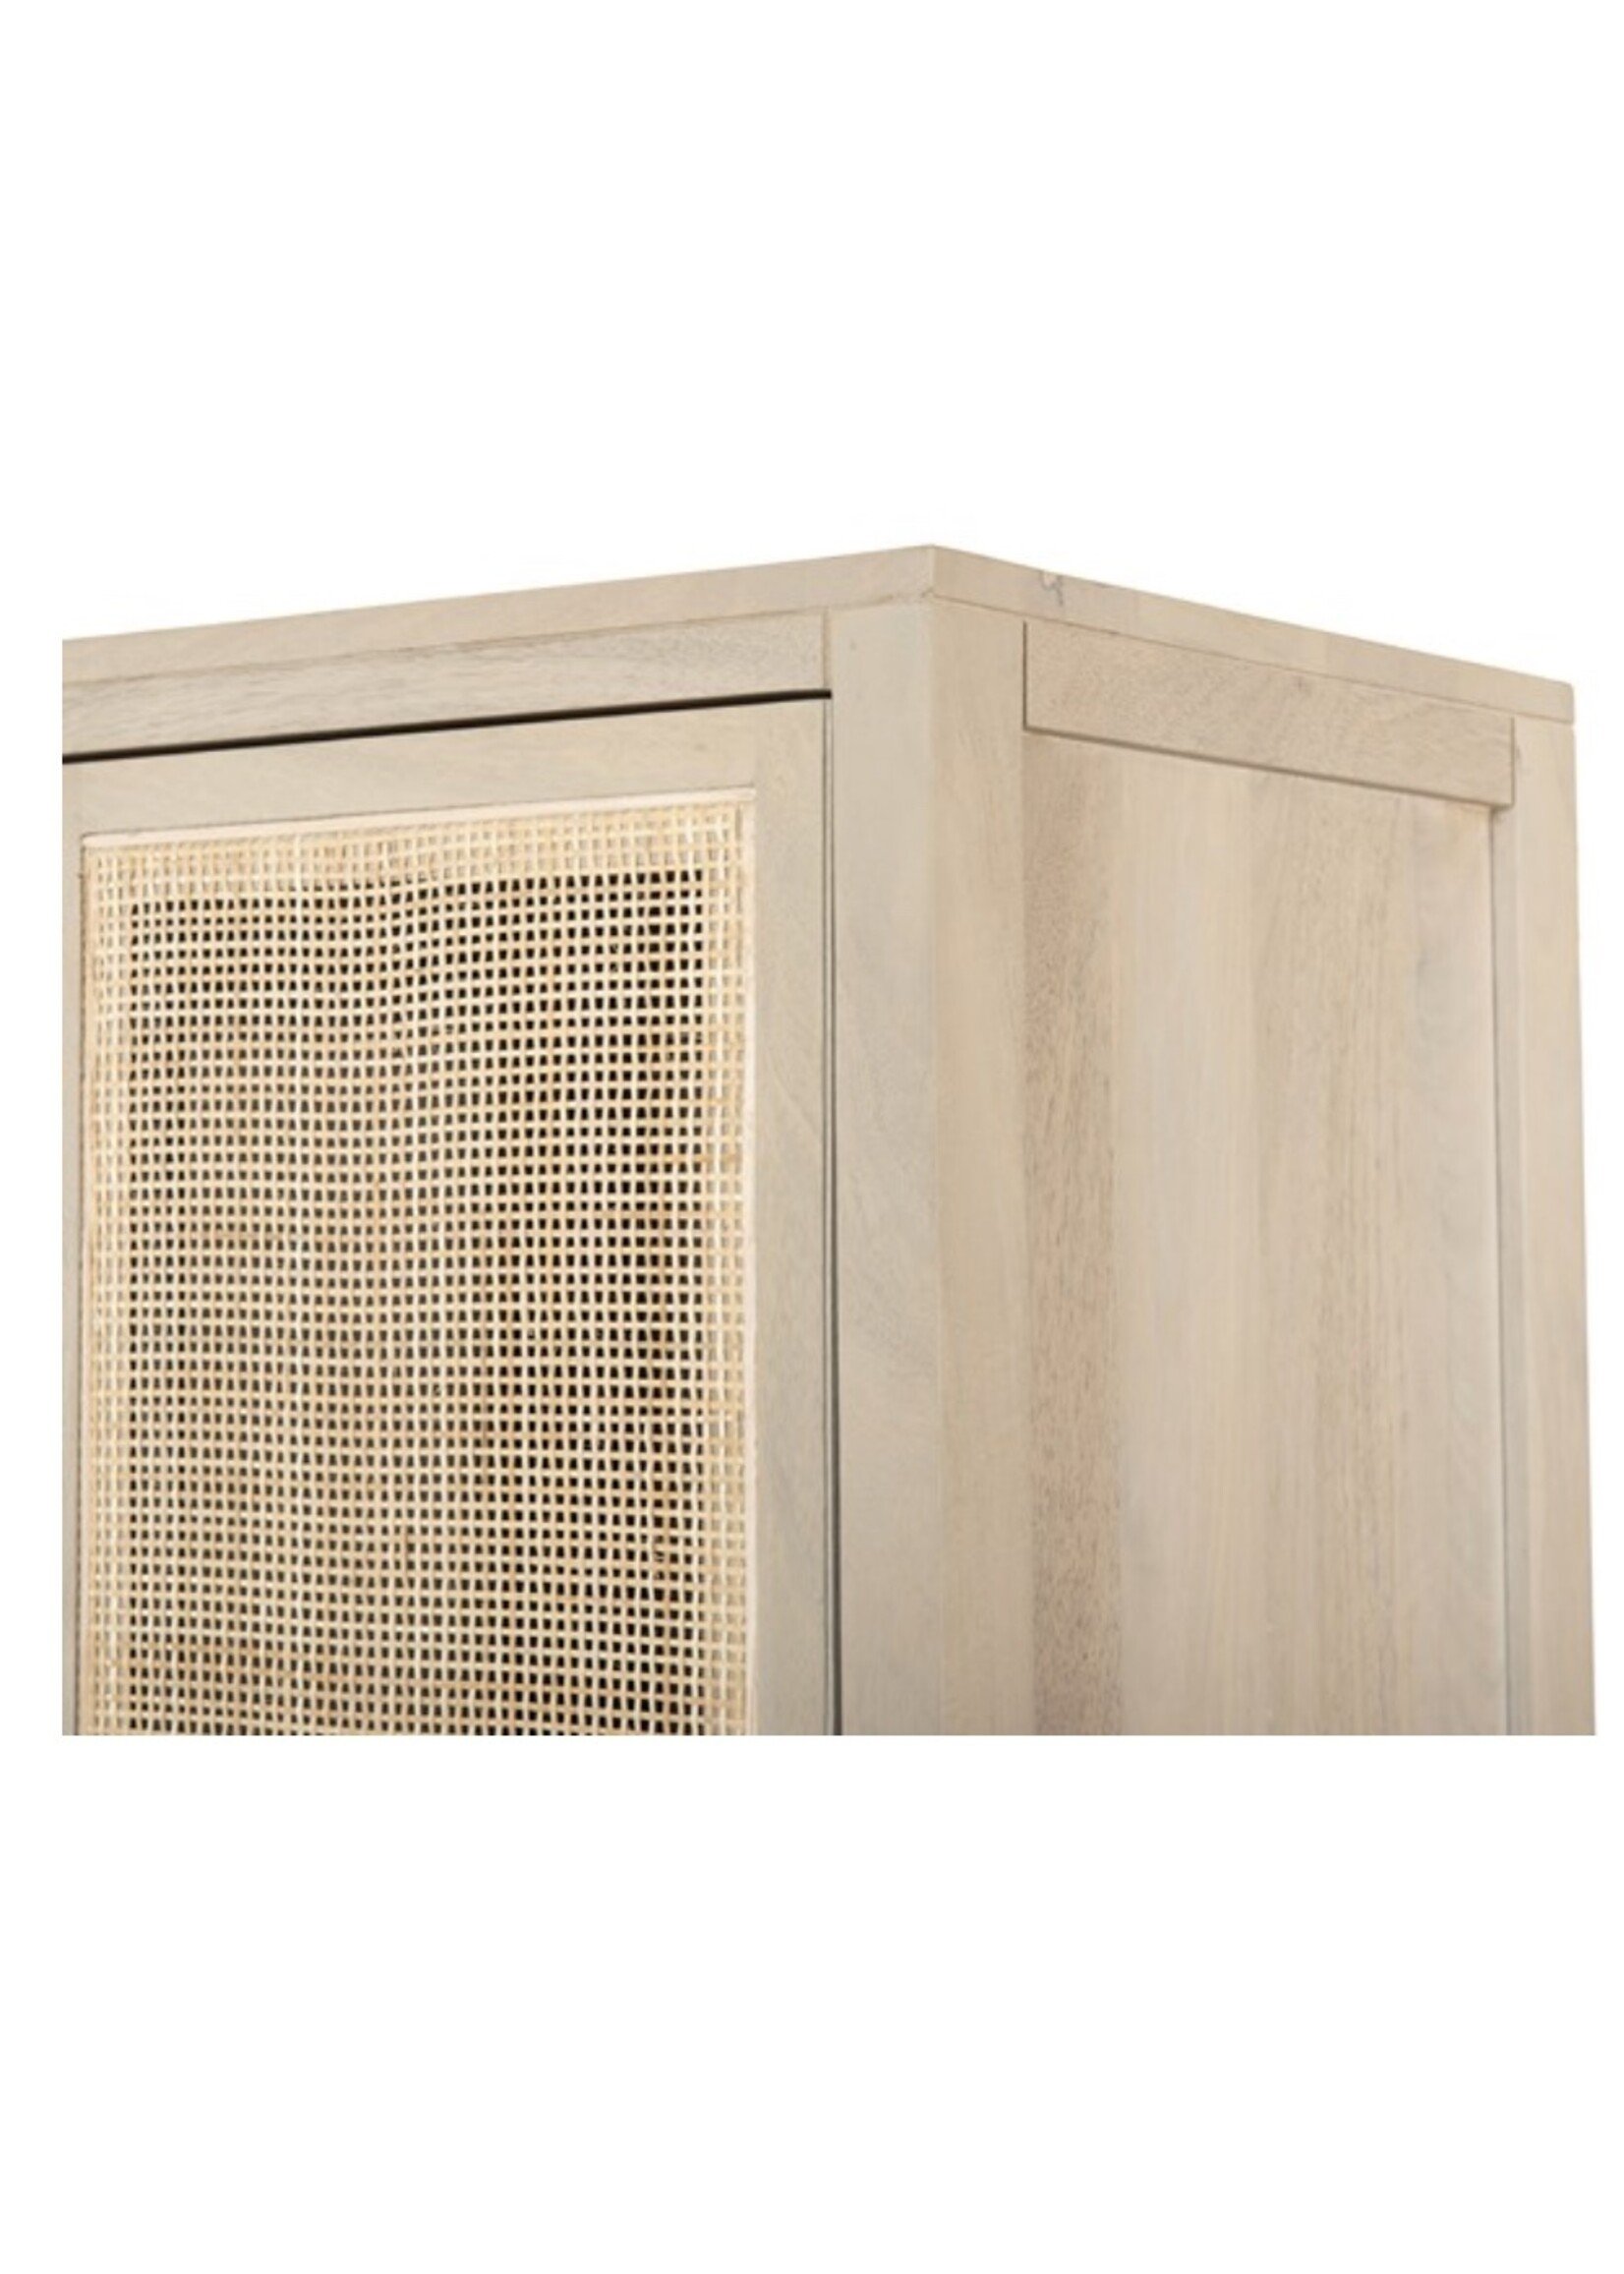 Caprice Cabinet-Natural-59"W